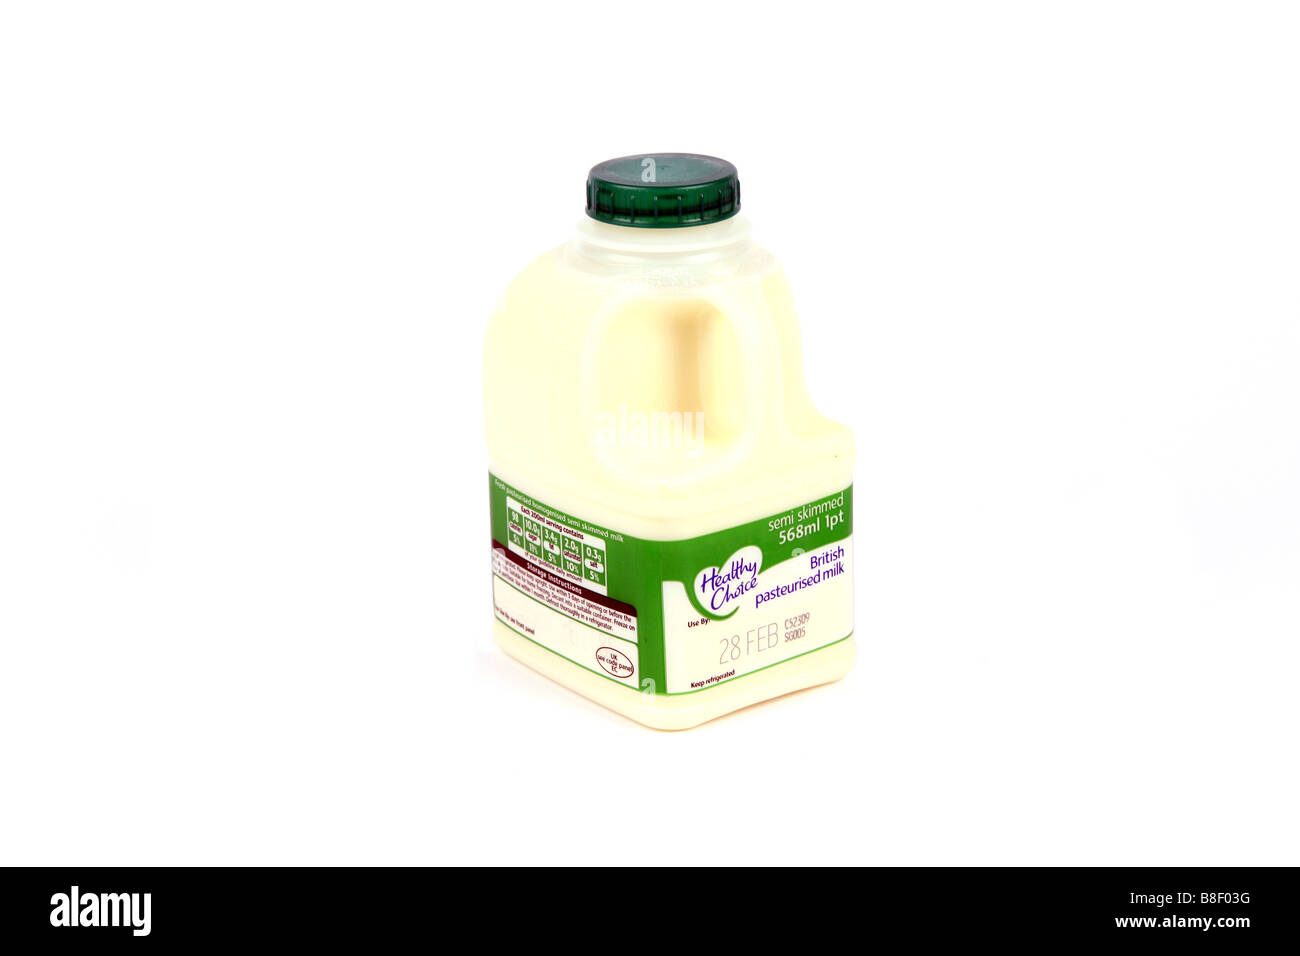 One Pint of semi skimmed milk in a plastic container against a white background Stock Photo